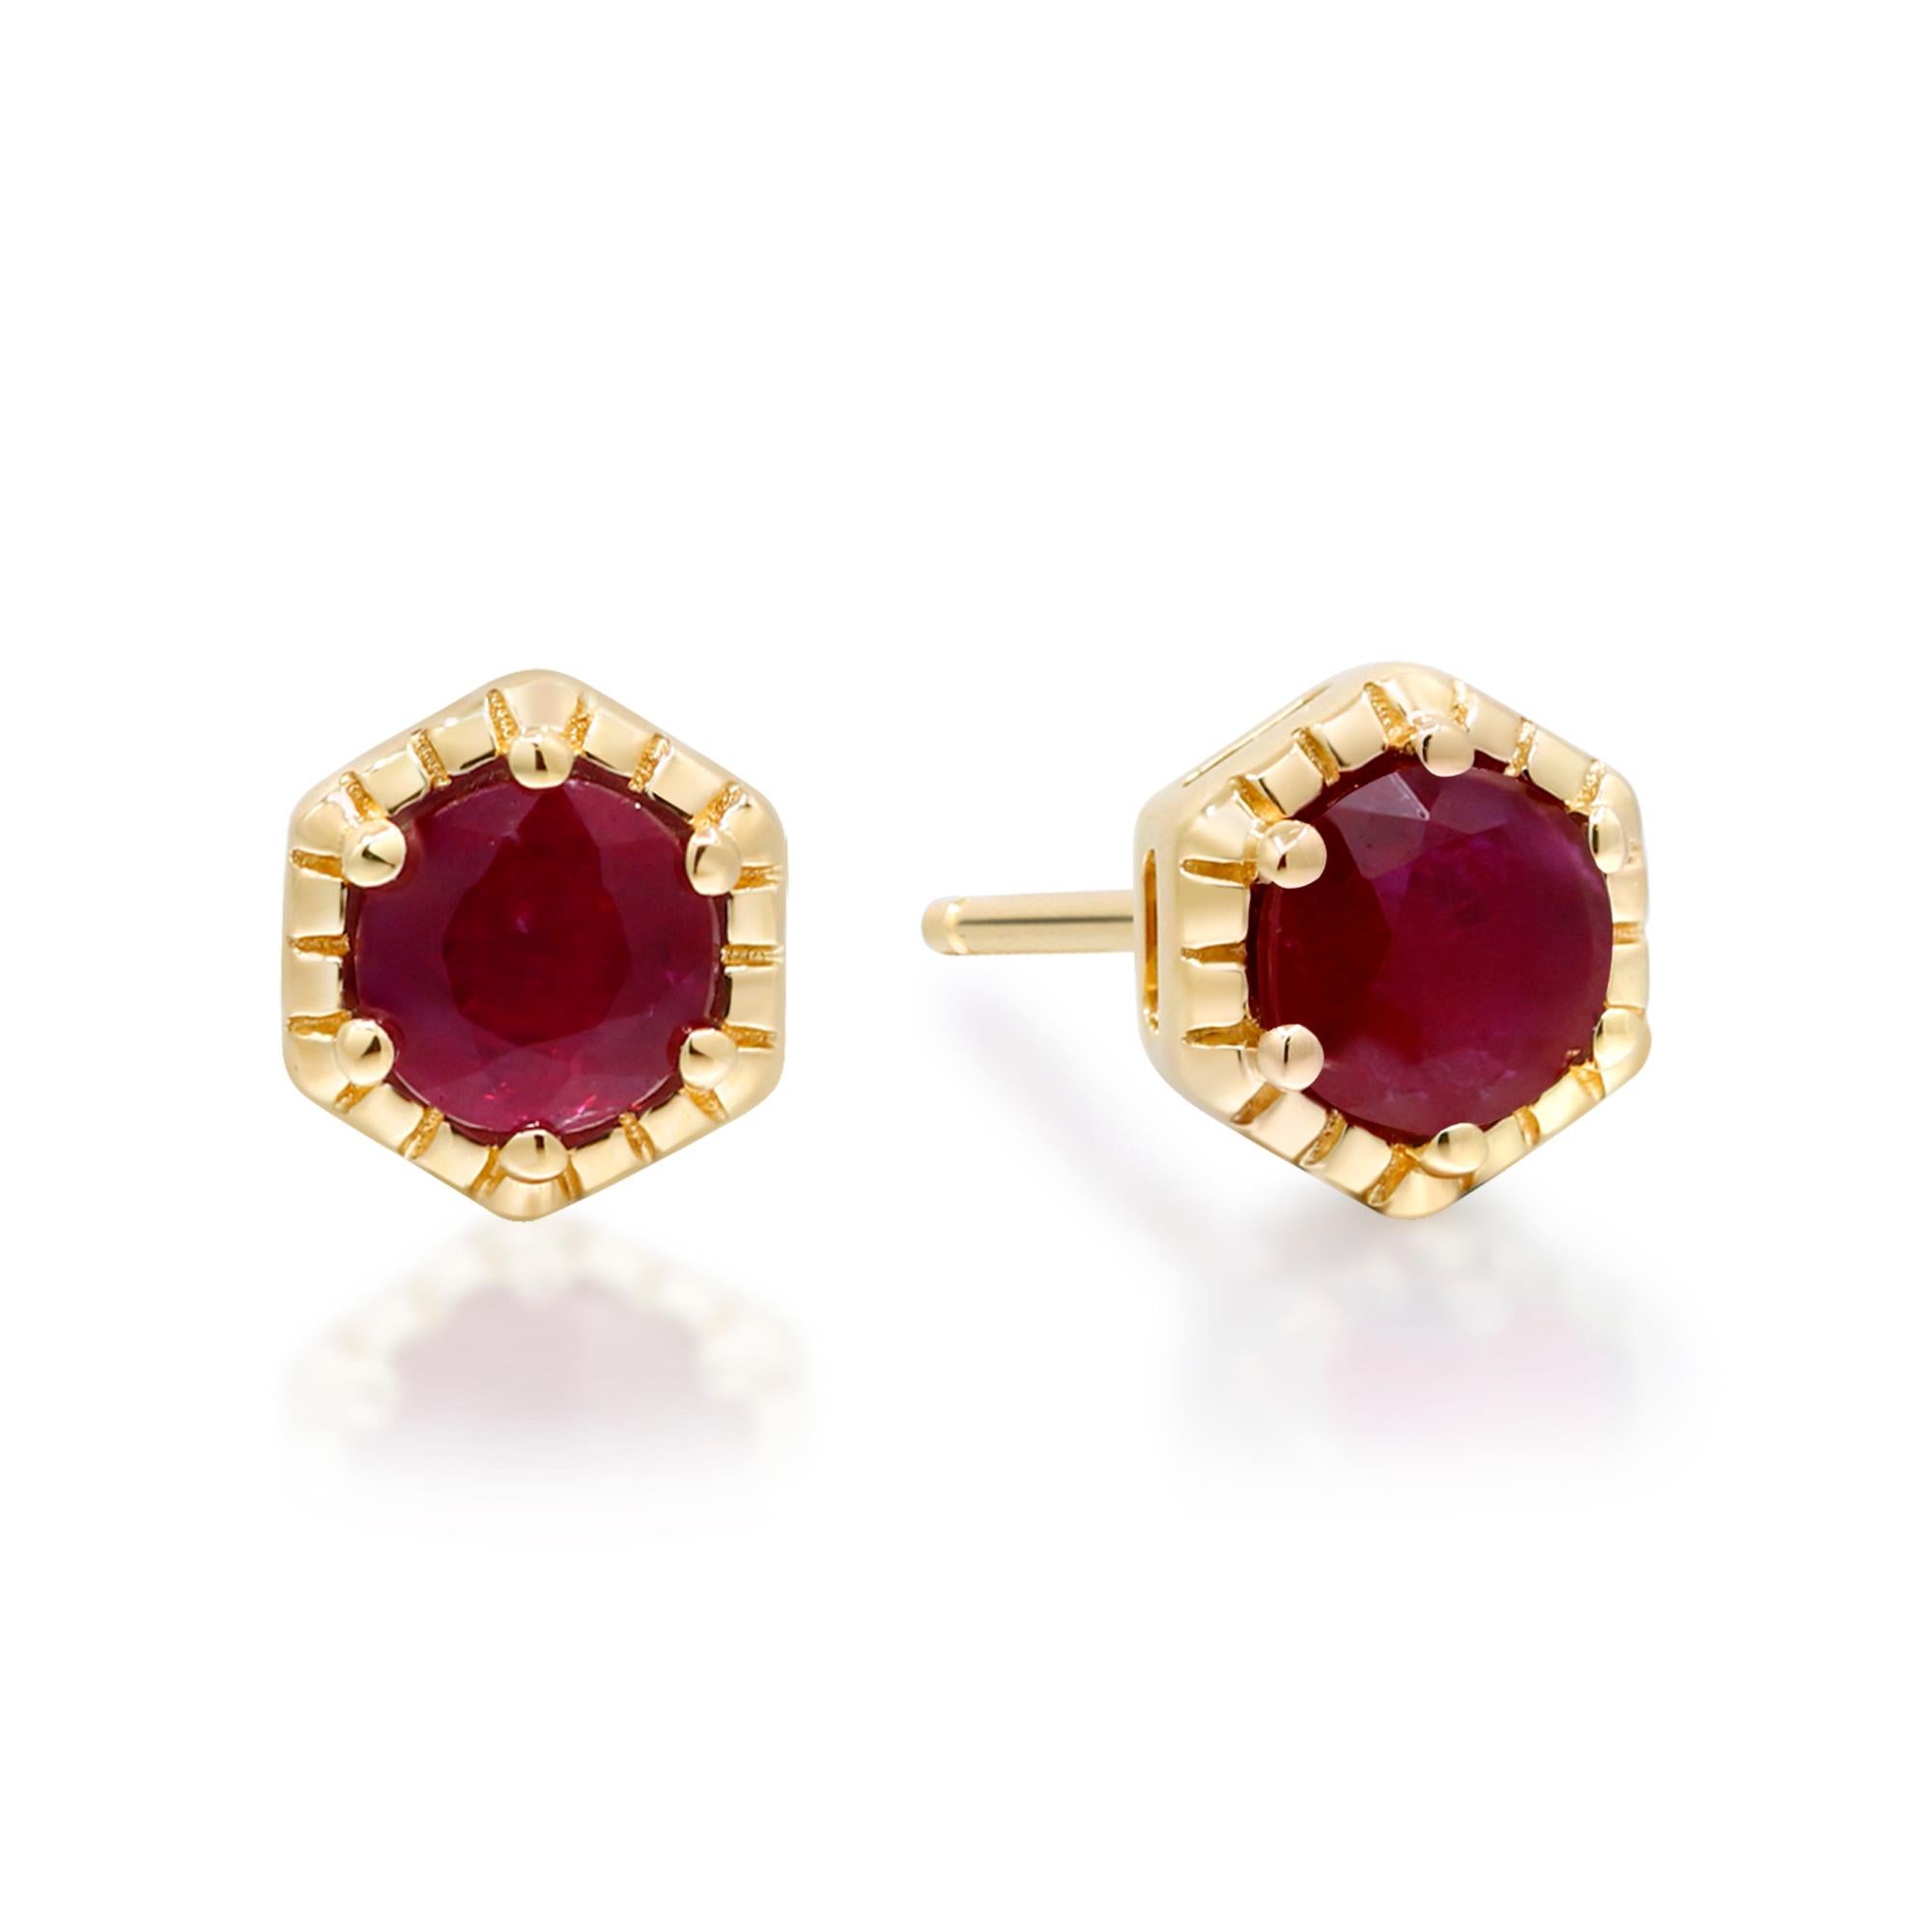 Decorate yourself in elegance with this Earring is crafted from 14-karat Yellow Gold by Gin & Grace Earring. This Earring is made up of 4.0 mm Round-cut (2 pcs) 0.70 carat Ruby. This Earring is weight 1.31 grams. This delicate Earring is polished to